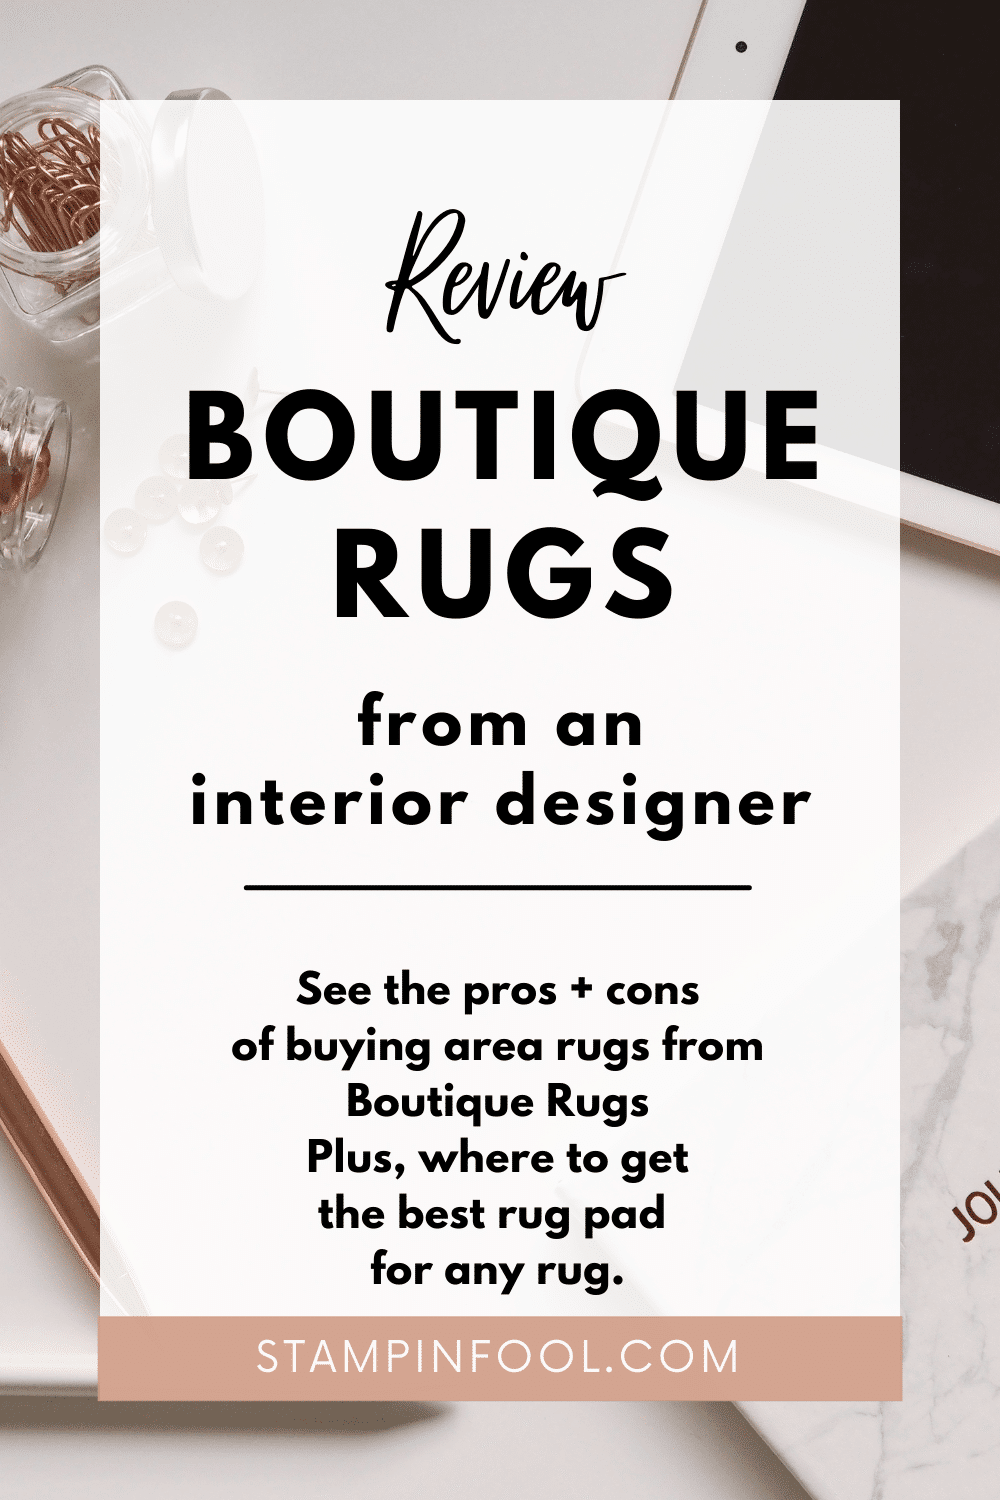 Boutique Rugs Dibble Area Rug Review: Everything you need to know about Boutique Rugs